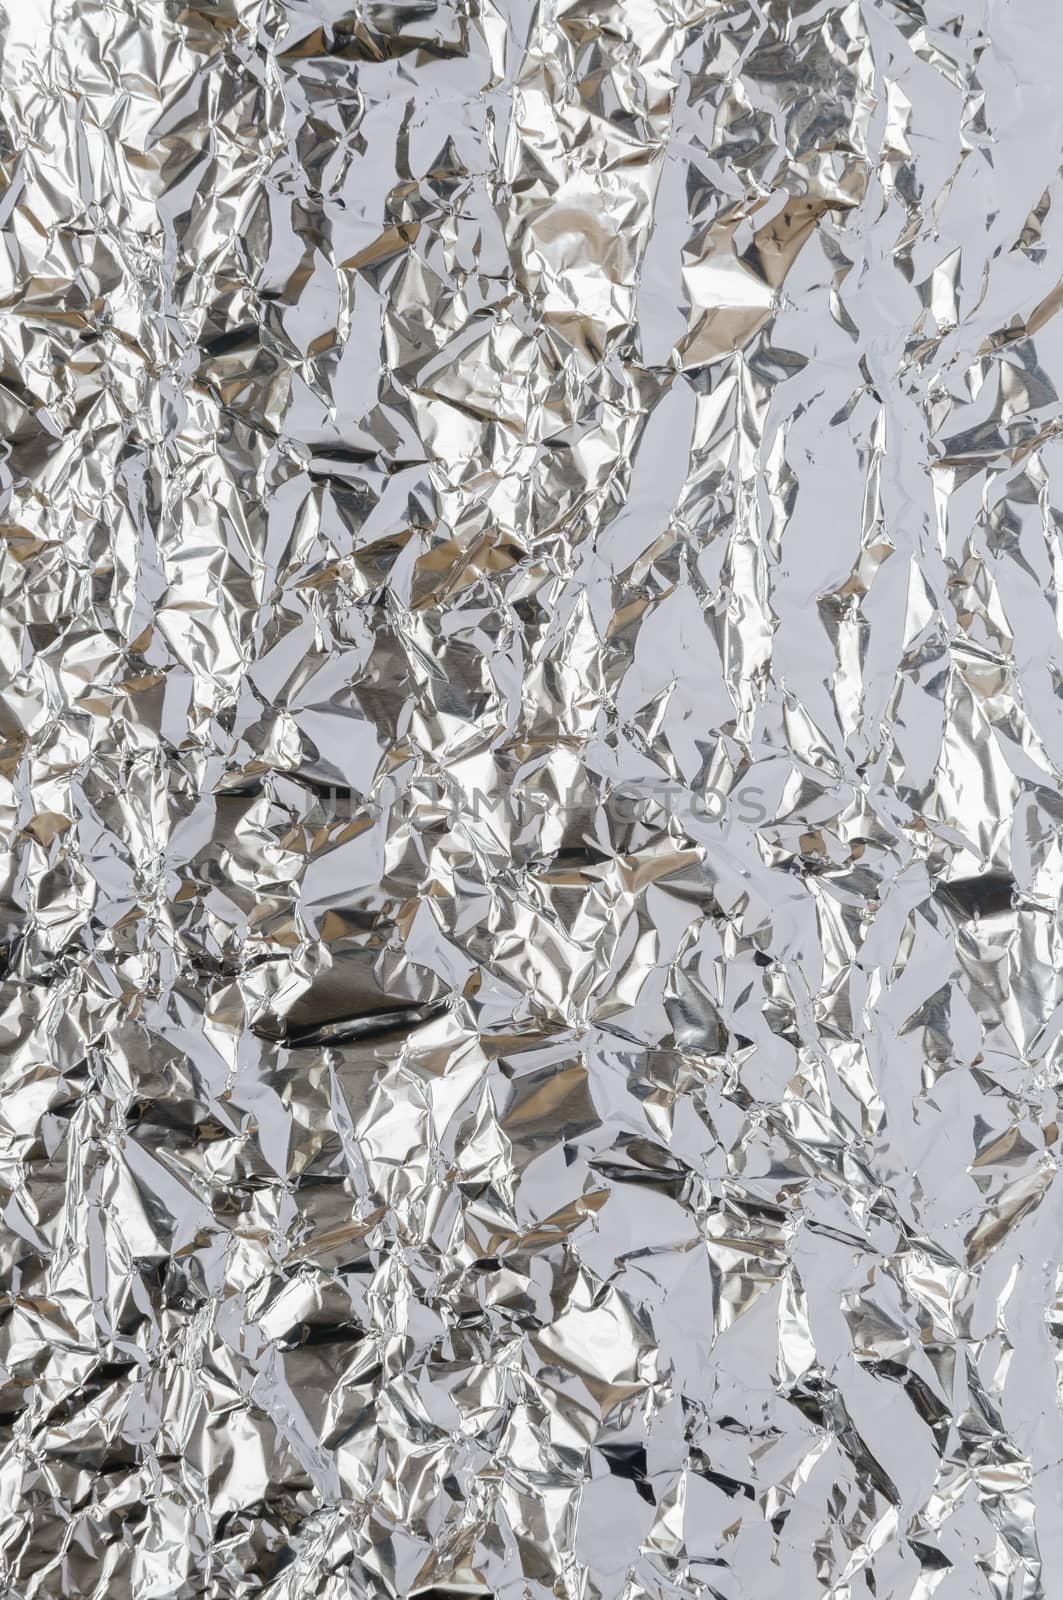 Crumpled aluminum metal foil with ambient reflection